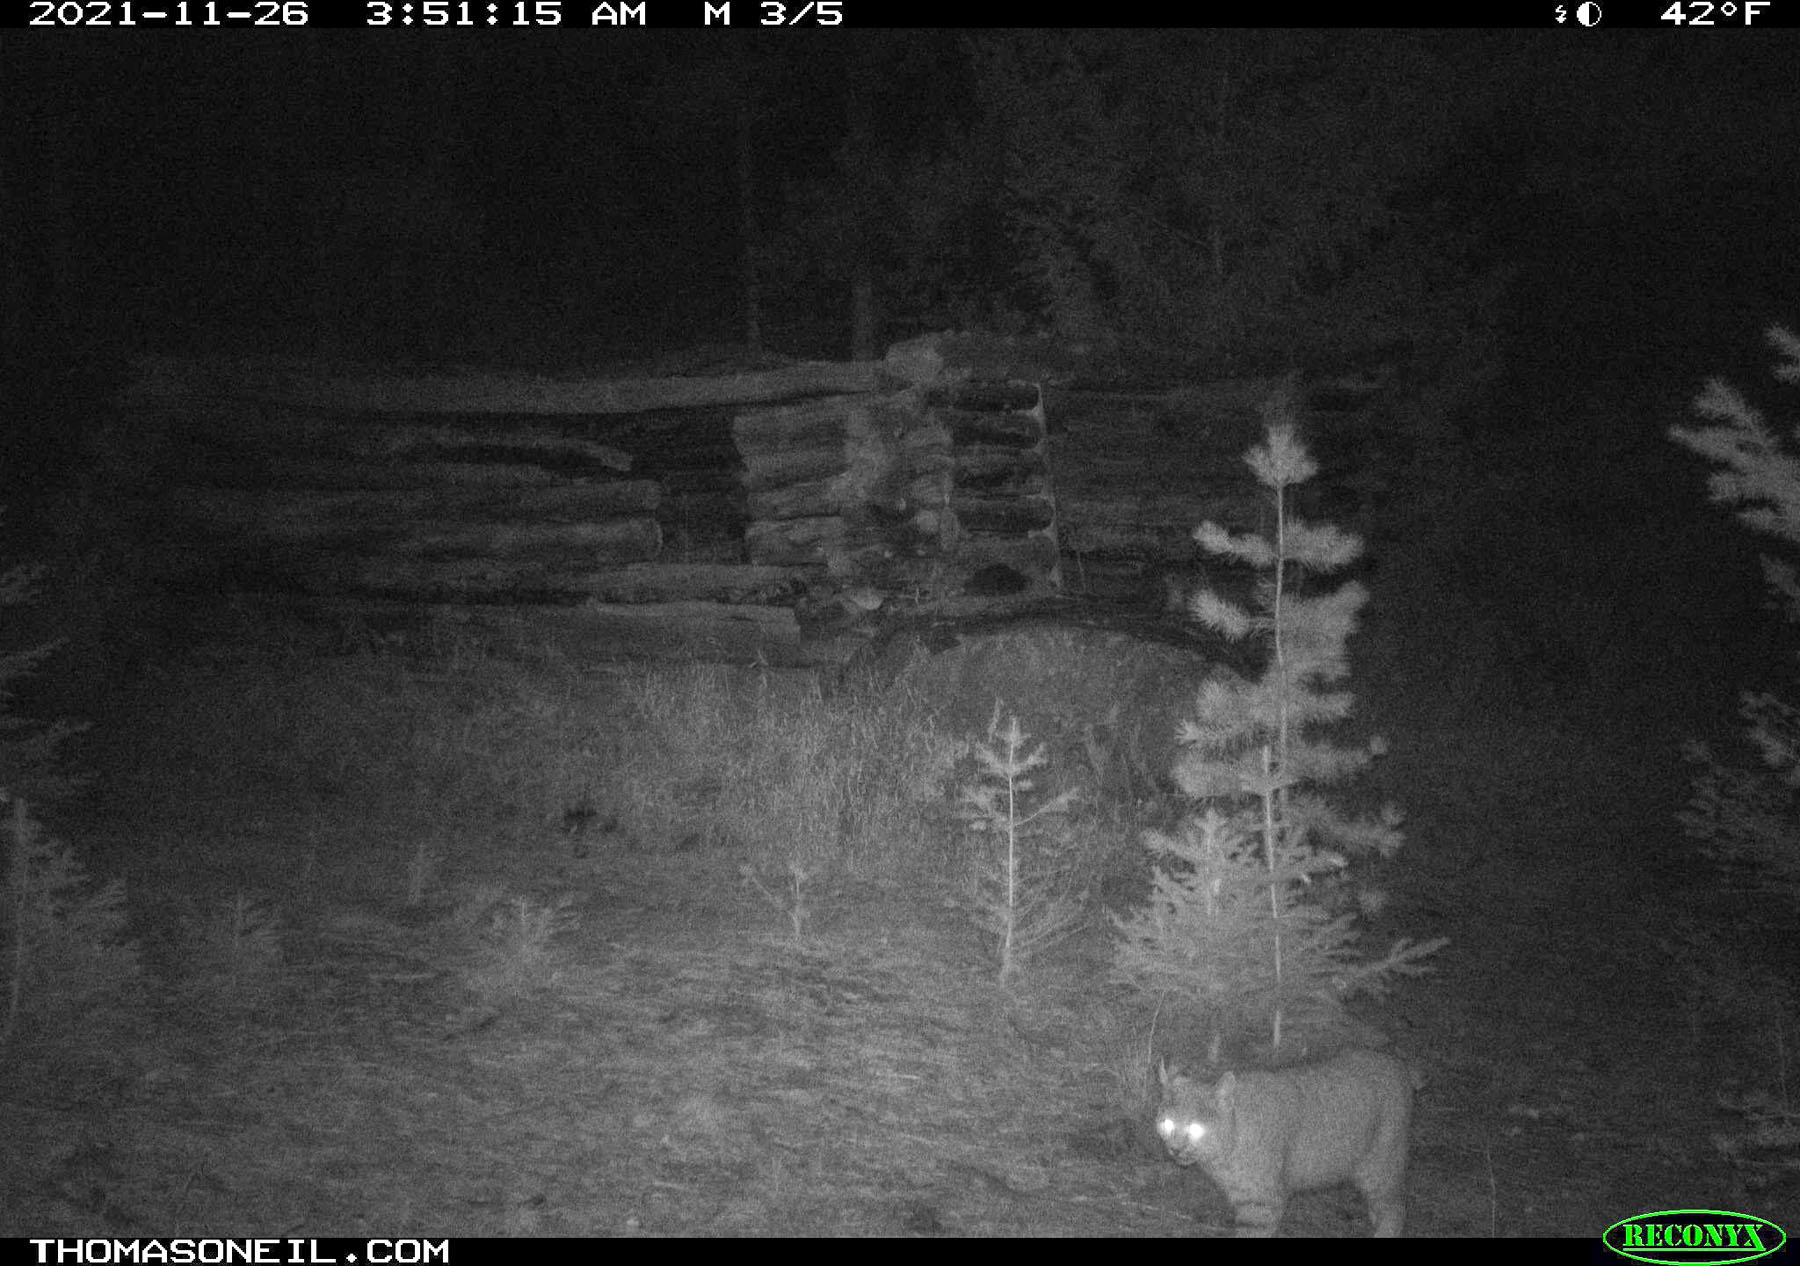 Bobcat on trailcam near Red Lodge, MT.  Click for next photo.